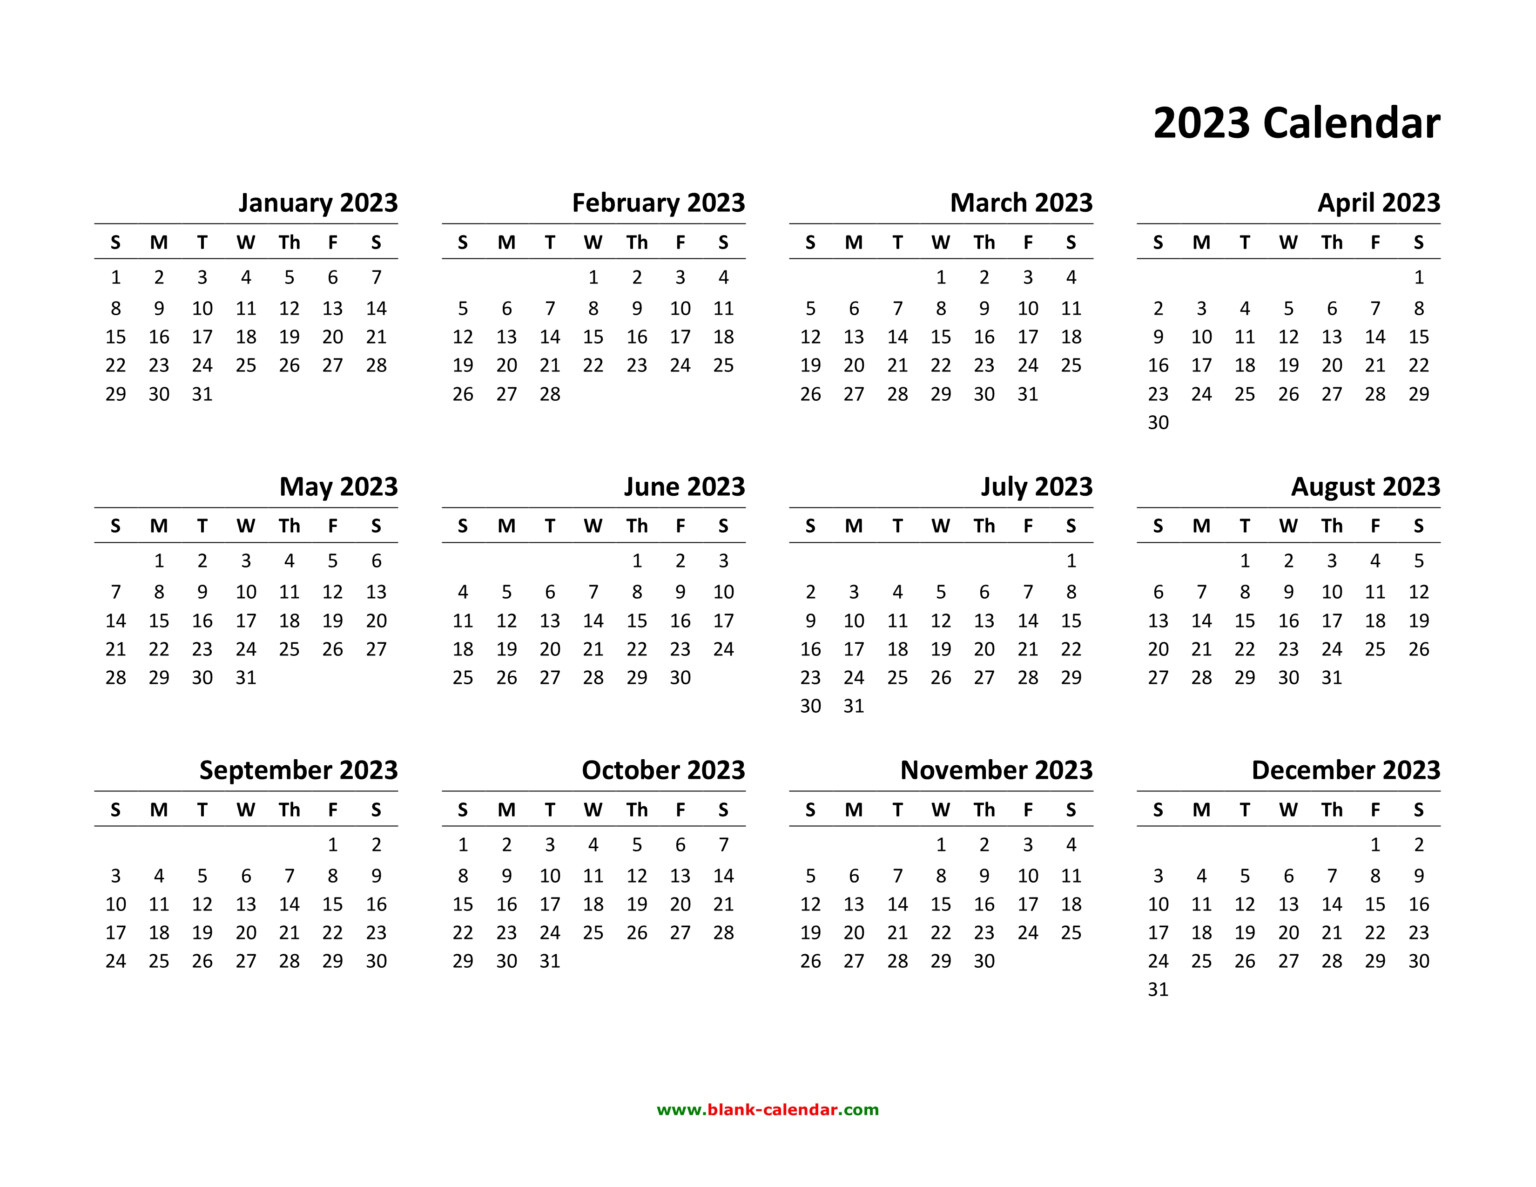 free-yearly-calendar-2023-printable-yearlycalendars